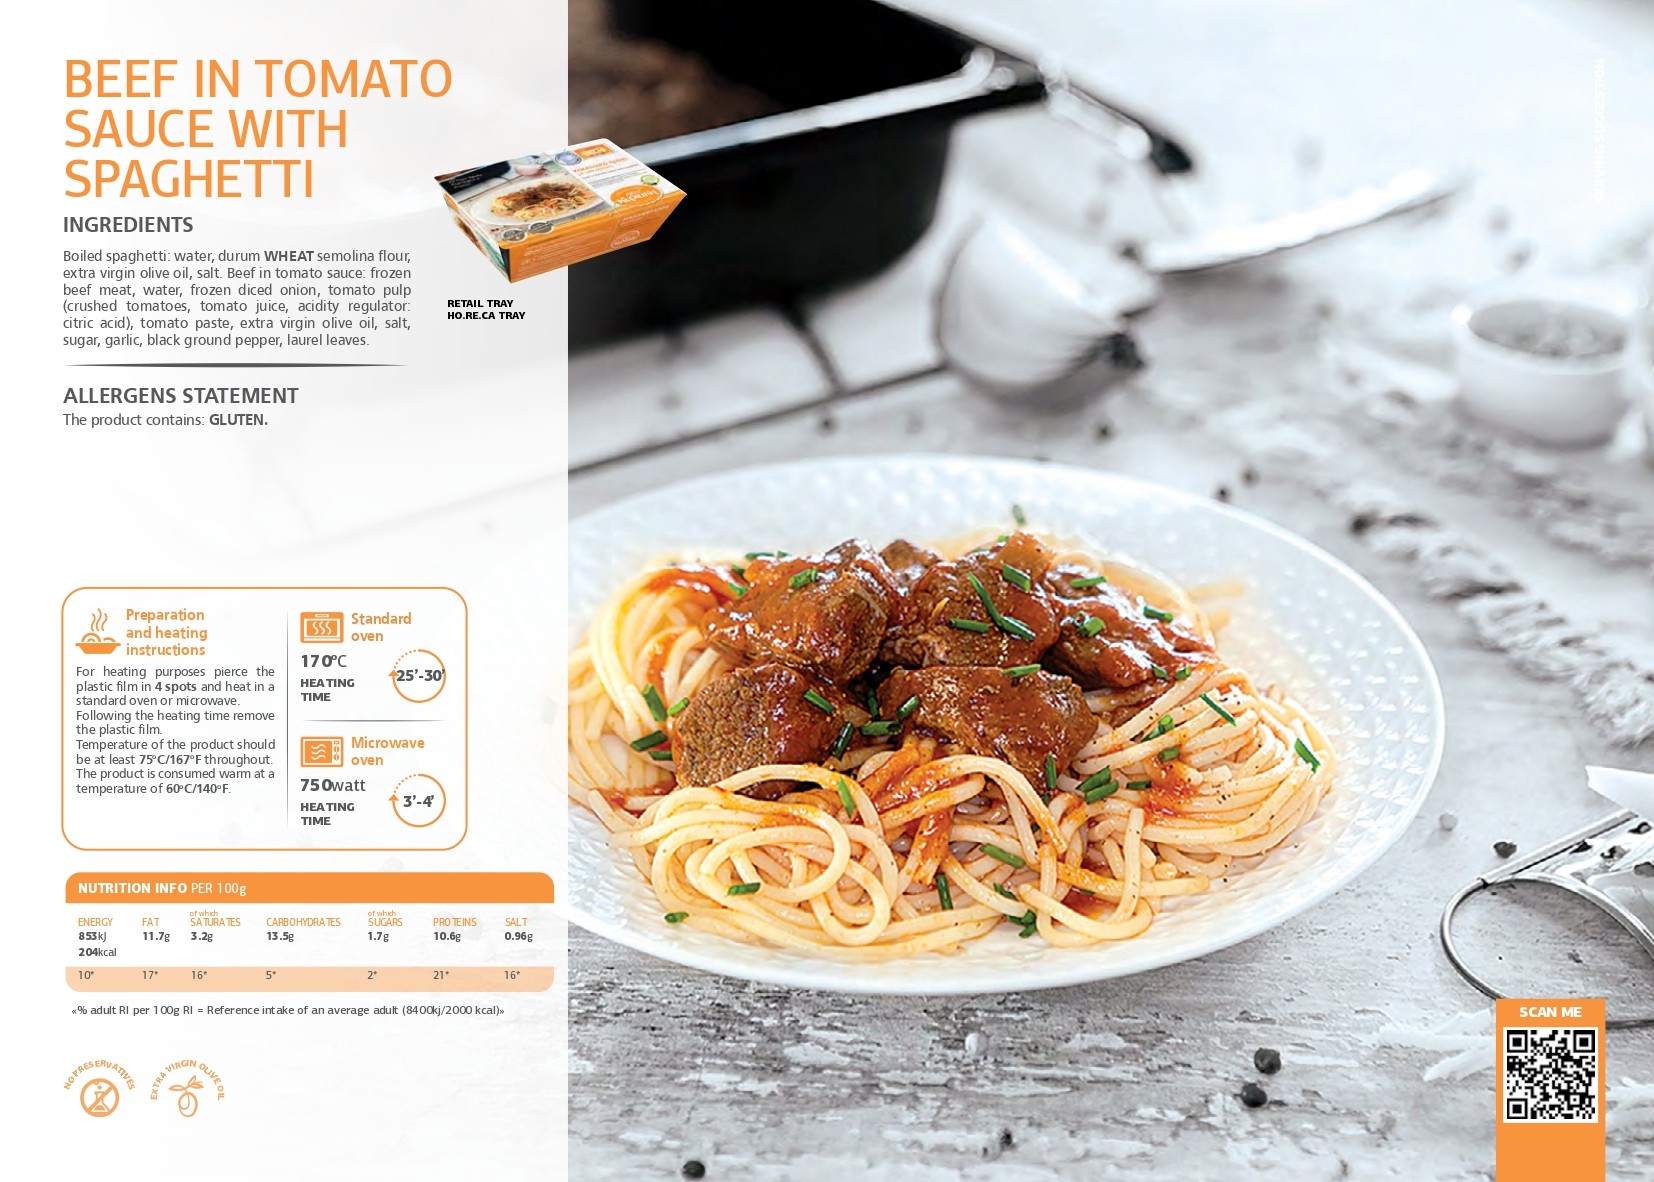 SK - Beef in tomato sauce with spaghetti pdf image